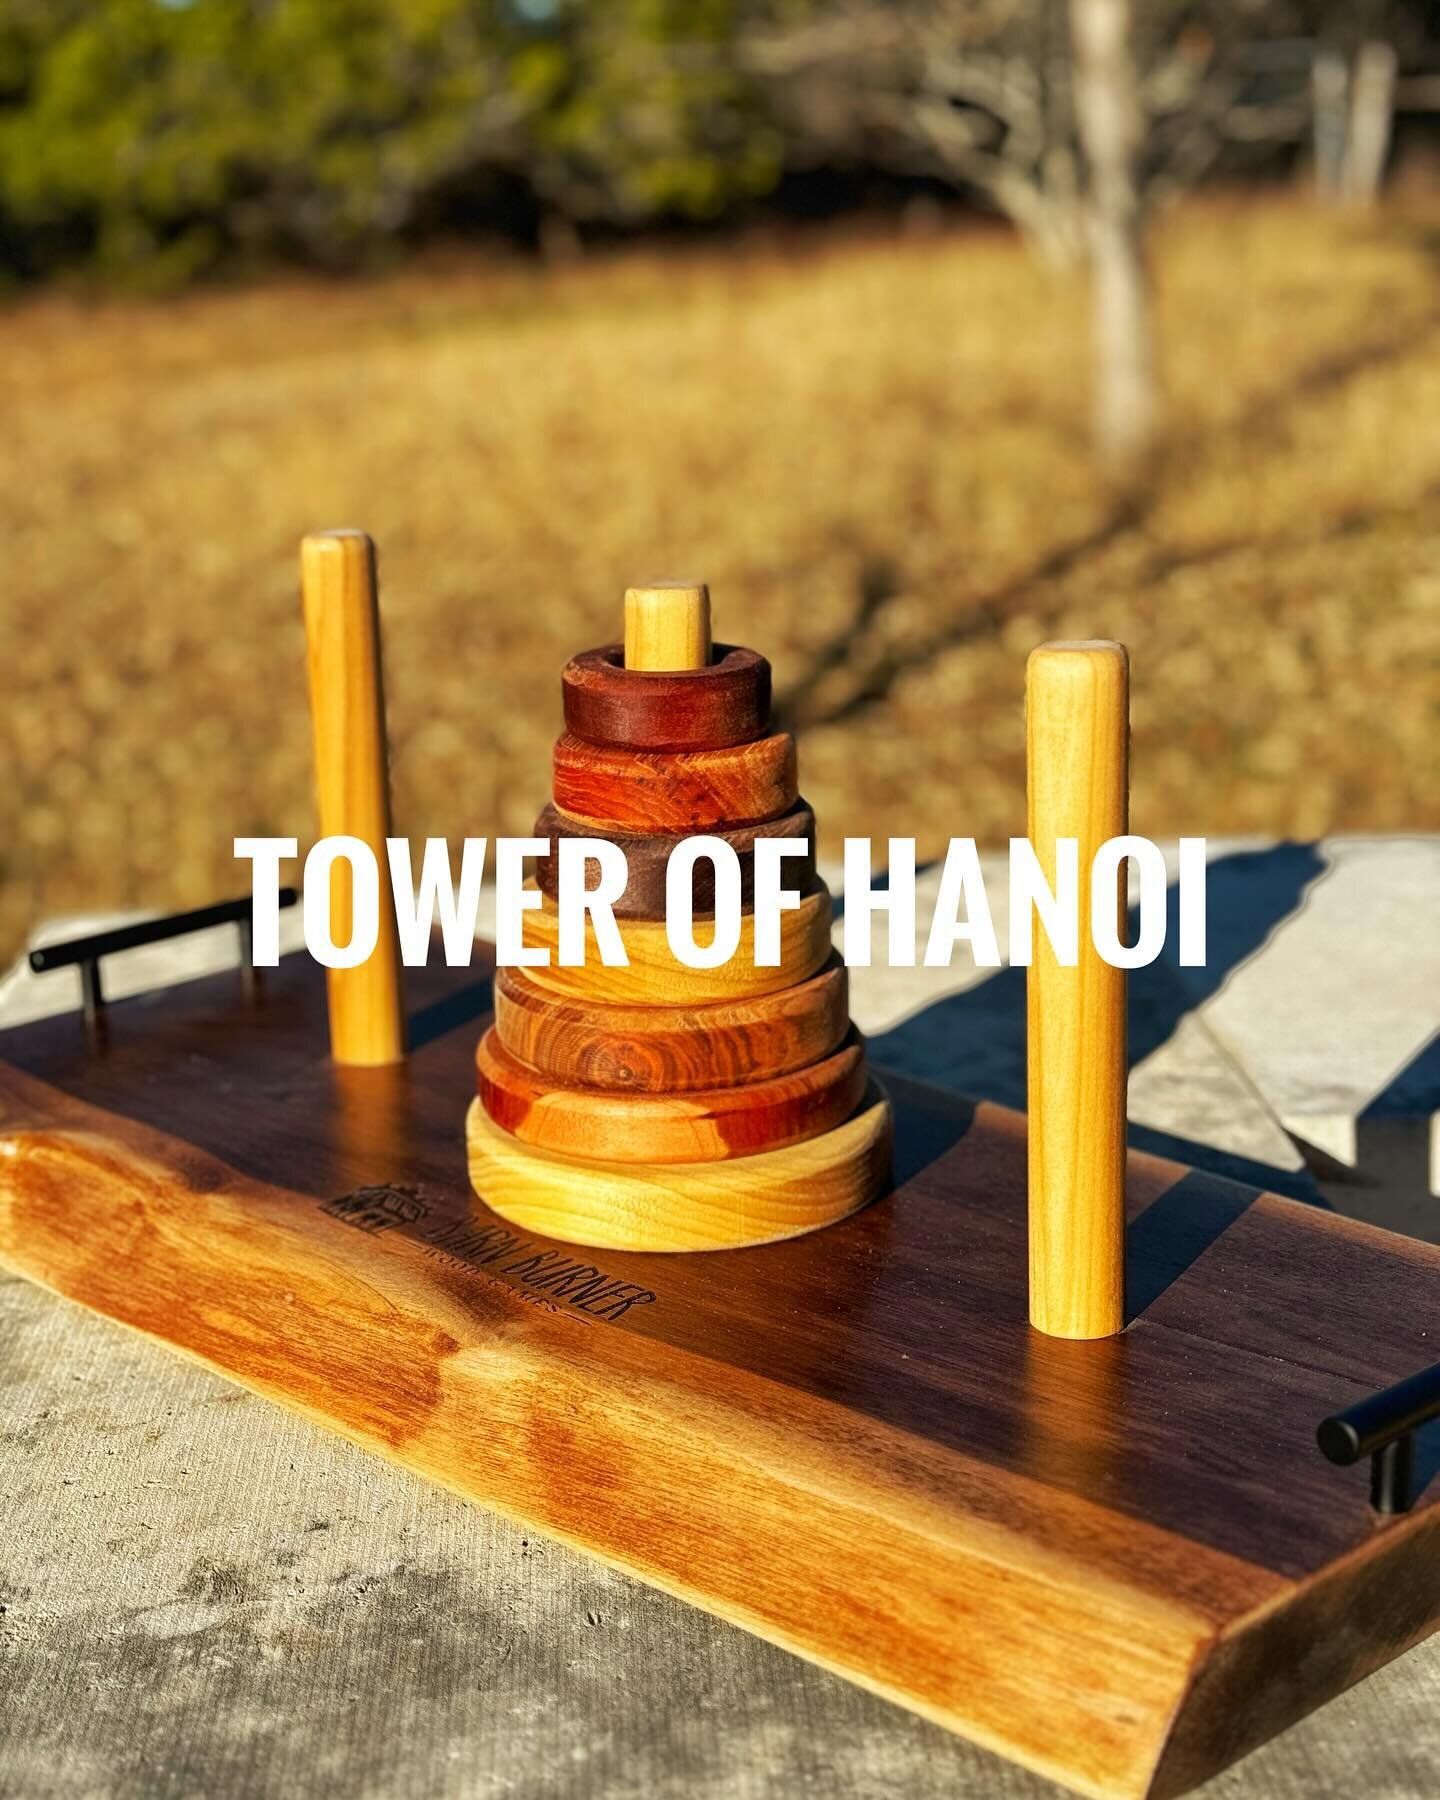 🔥Game Time🔥

Name: Tower of Hanoi

Type: Interactive, strategy

Play Style: 1 vs. game

Category: indoor / outdoor
_______________________________________________

Let&rsquo;s dive into the world of Tower of Hanoi! Did you know it originated in Vie